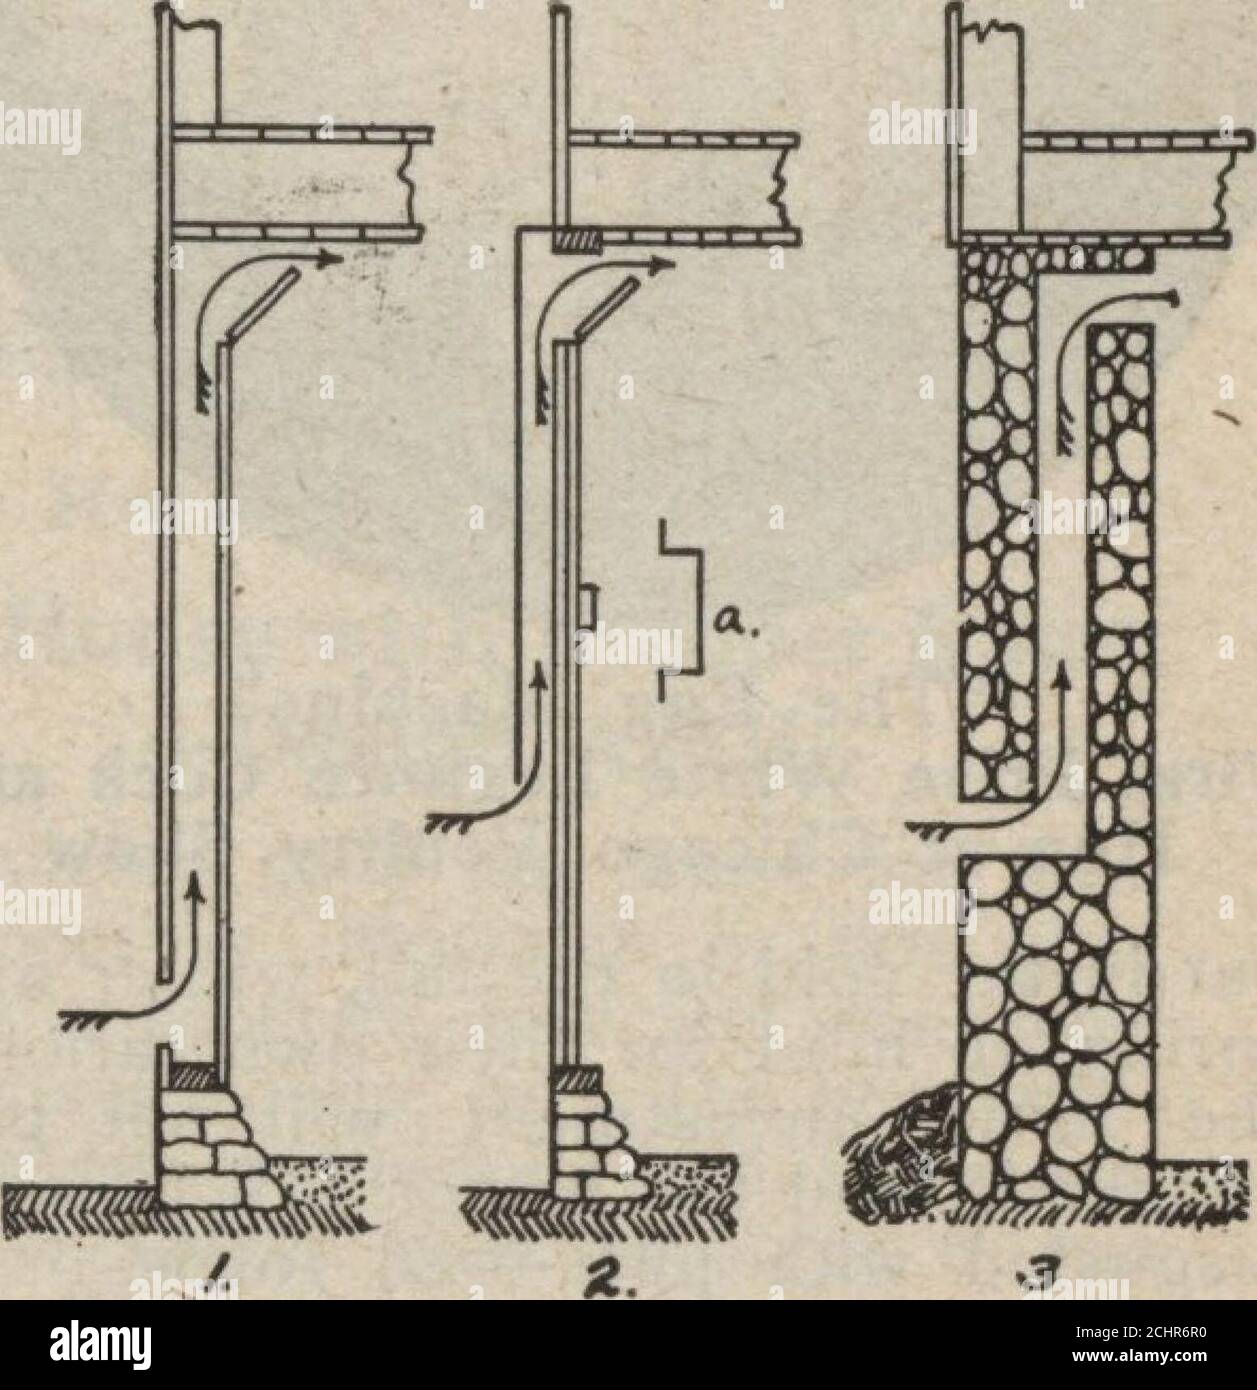 . Our farm and building book. . e &lt;^3 N-4-2X/0 ■5PIPE COLUMN yL^^^jl^Lr,.,,, .,.-.,..,„, & -8ka?om m t=t J L Cross-section through Barn No. A255L to Show Method of Construction.. Fig. 2. Intake, or Fresh Air Openingsin Various Types of Walls. ing in summer. This may be openedor closed as desired, but the big ven-tilators are always open at the bottomto draw off the foul air from thestable. In figure 2, the intake of cold, freshair from outside is shown at B.There are eight of such intake flues,each 8 by 10 in size, five on the westside, three on the other. The fresh-air flues open inward at Stock Photo